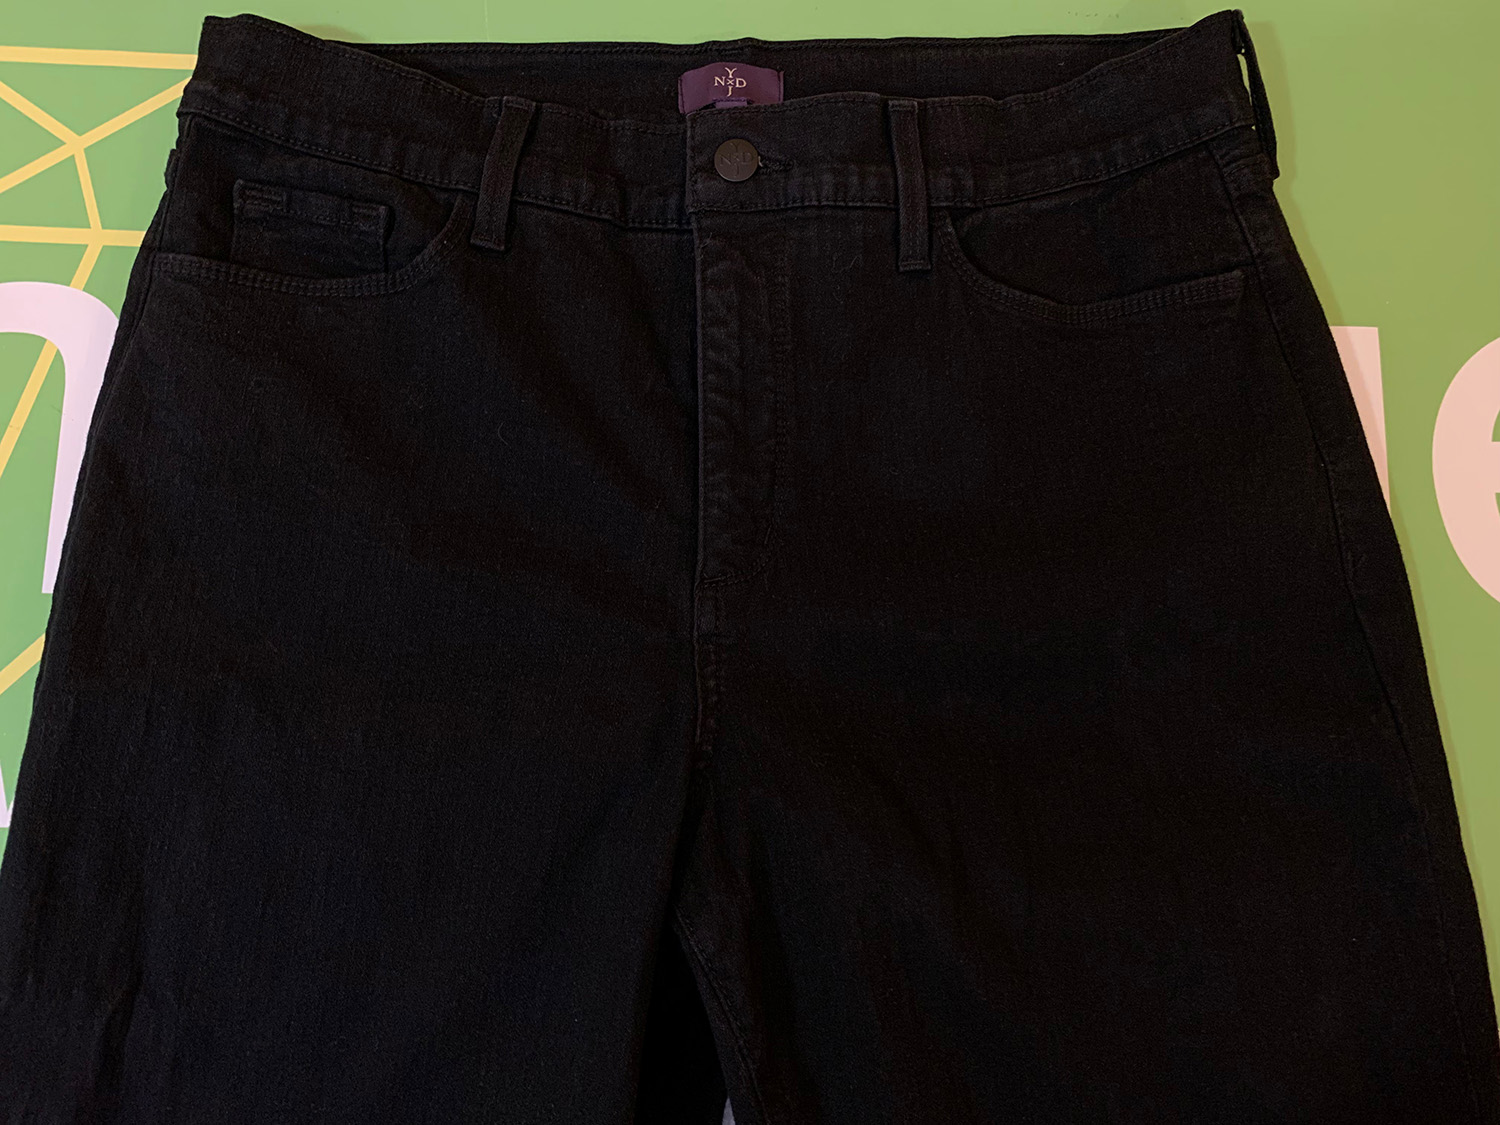 NYDJ Not Your Daughters Jeans Womens Straight Black Jeans Size 14 at The MenuGem Web Store